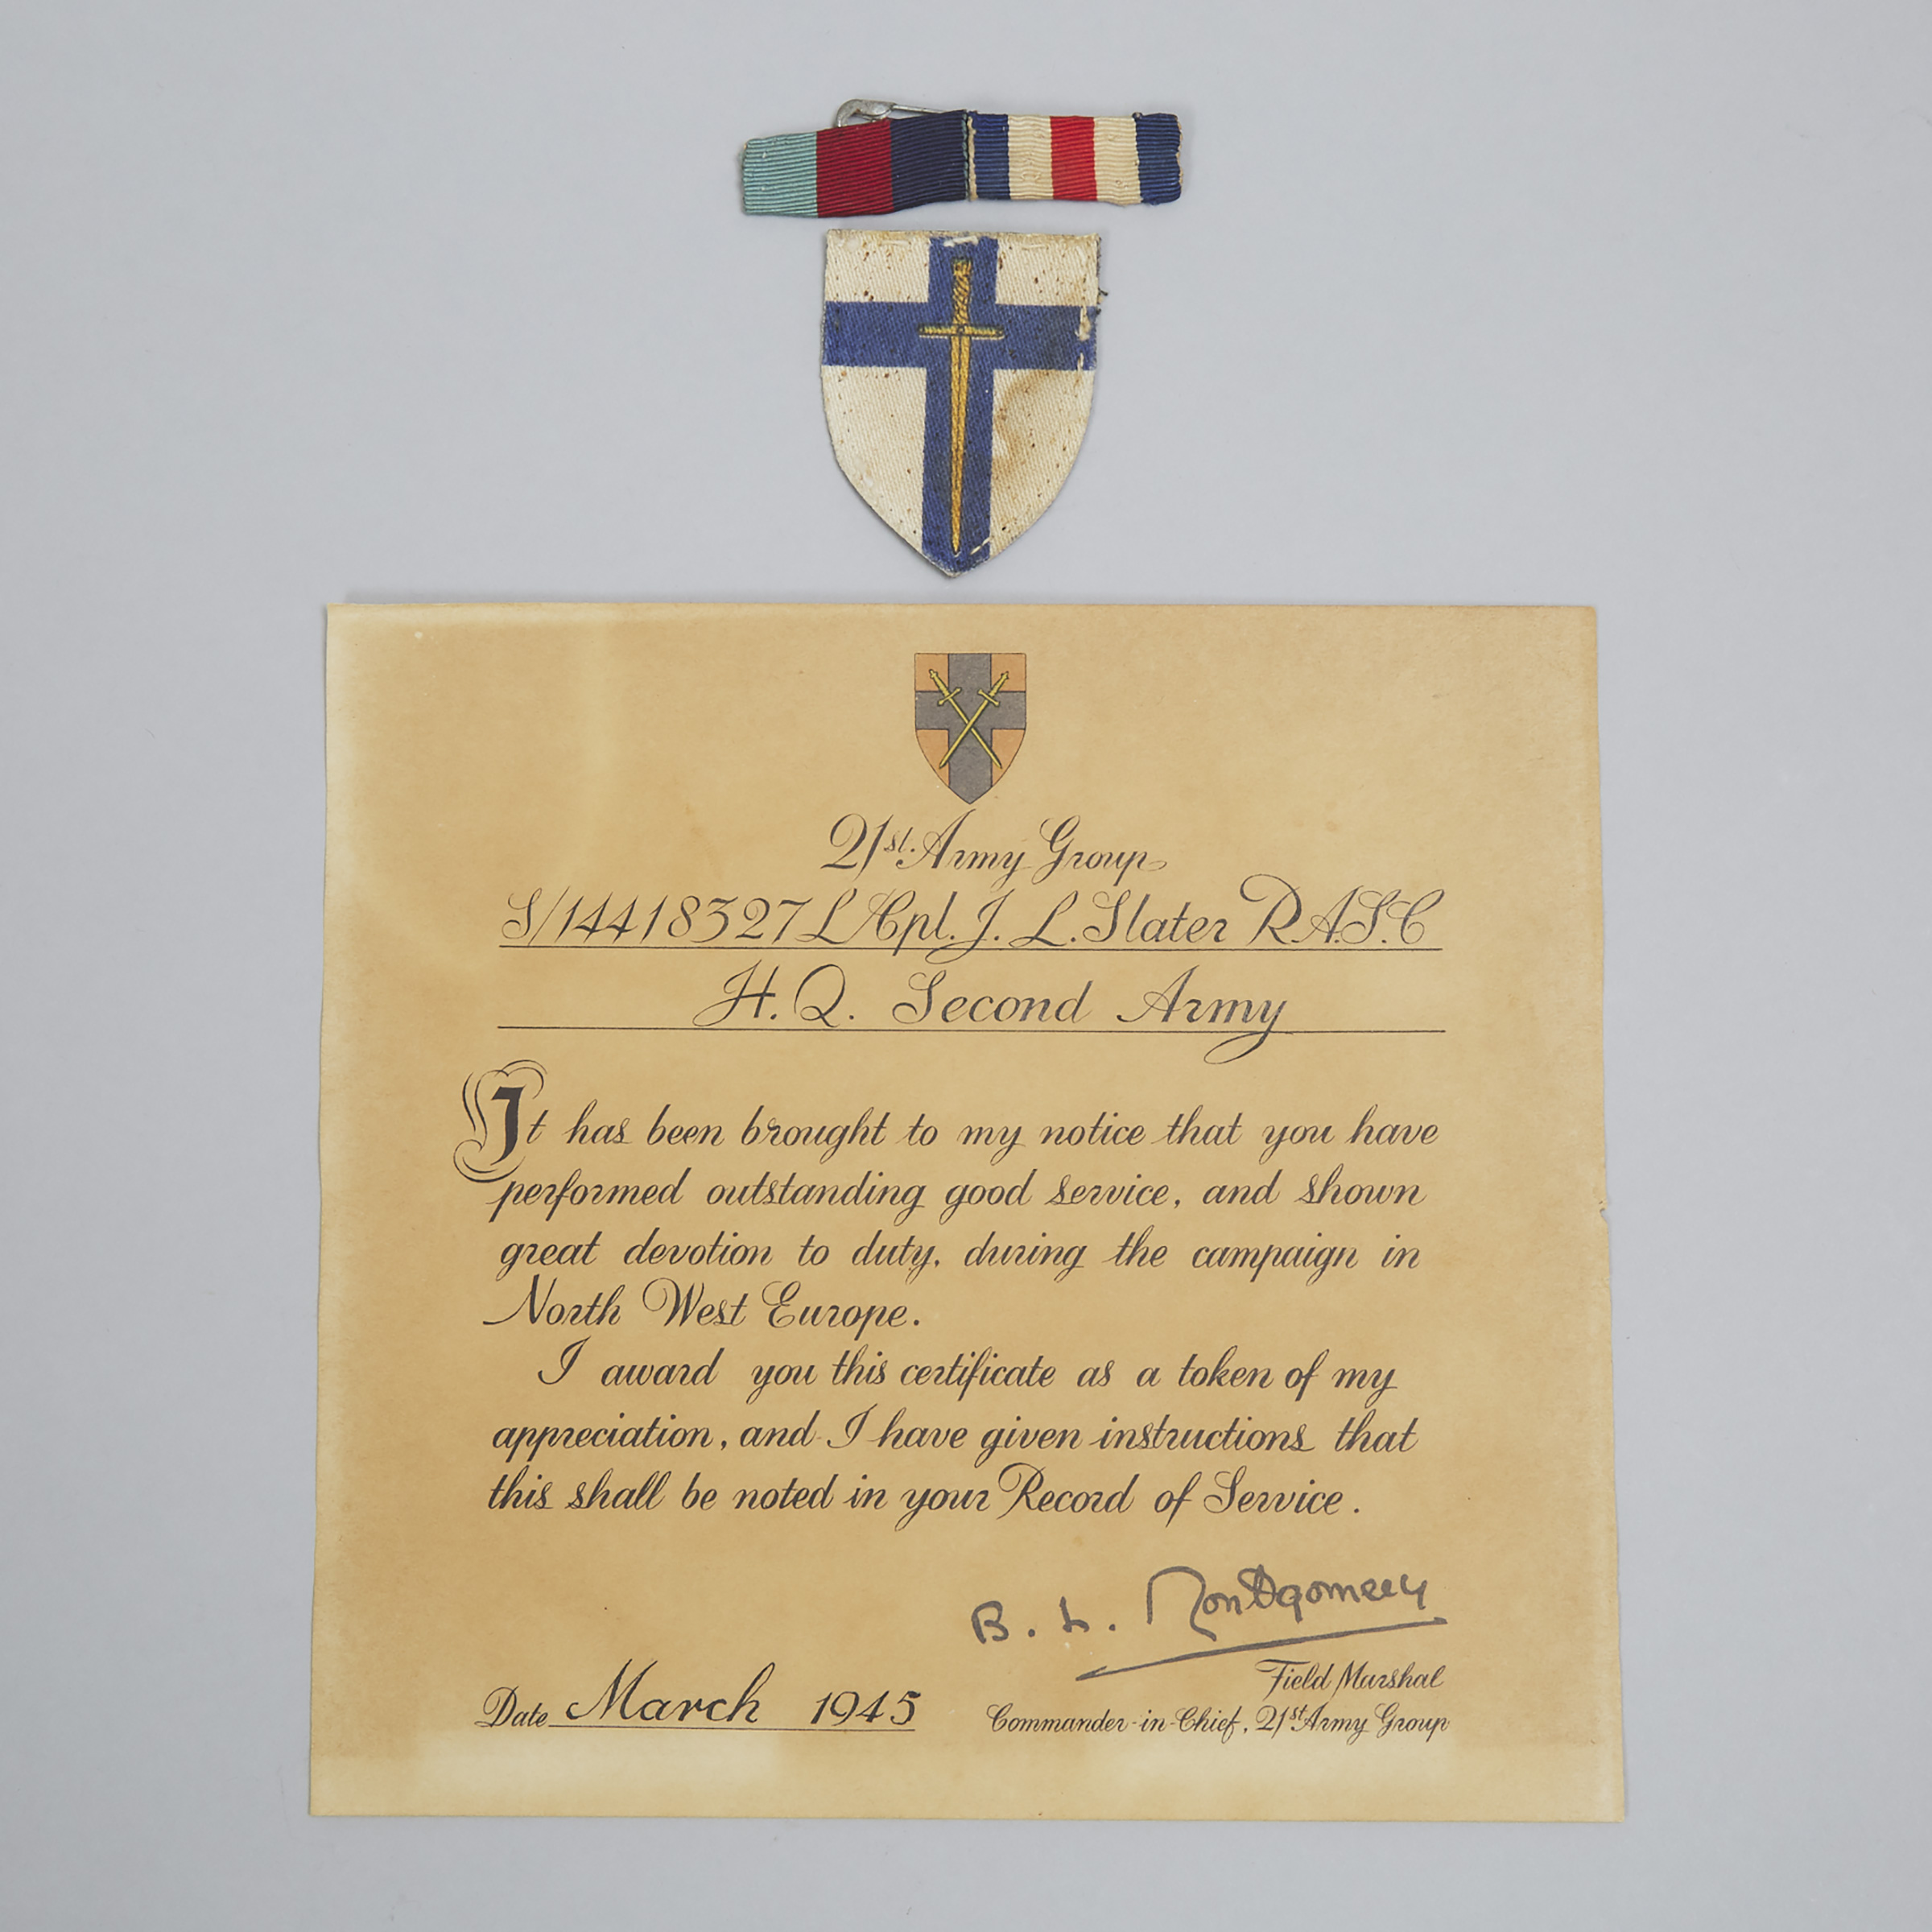 Field Marshall B. L. Montgomery, Commander-in-Chief, Certificate of Merit to L. Cpl. J. L. Slater, Royal Army Service Corps, March, 1945